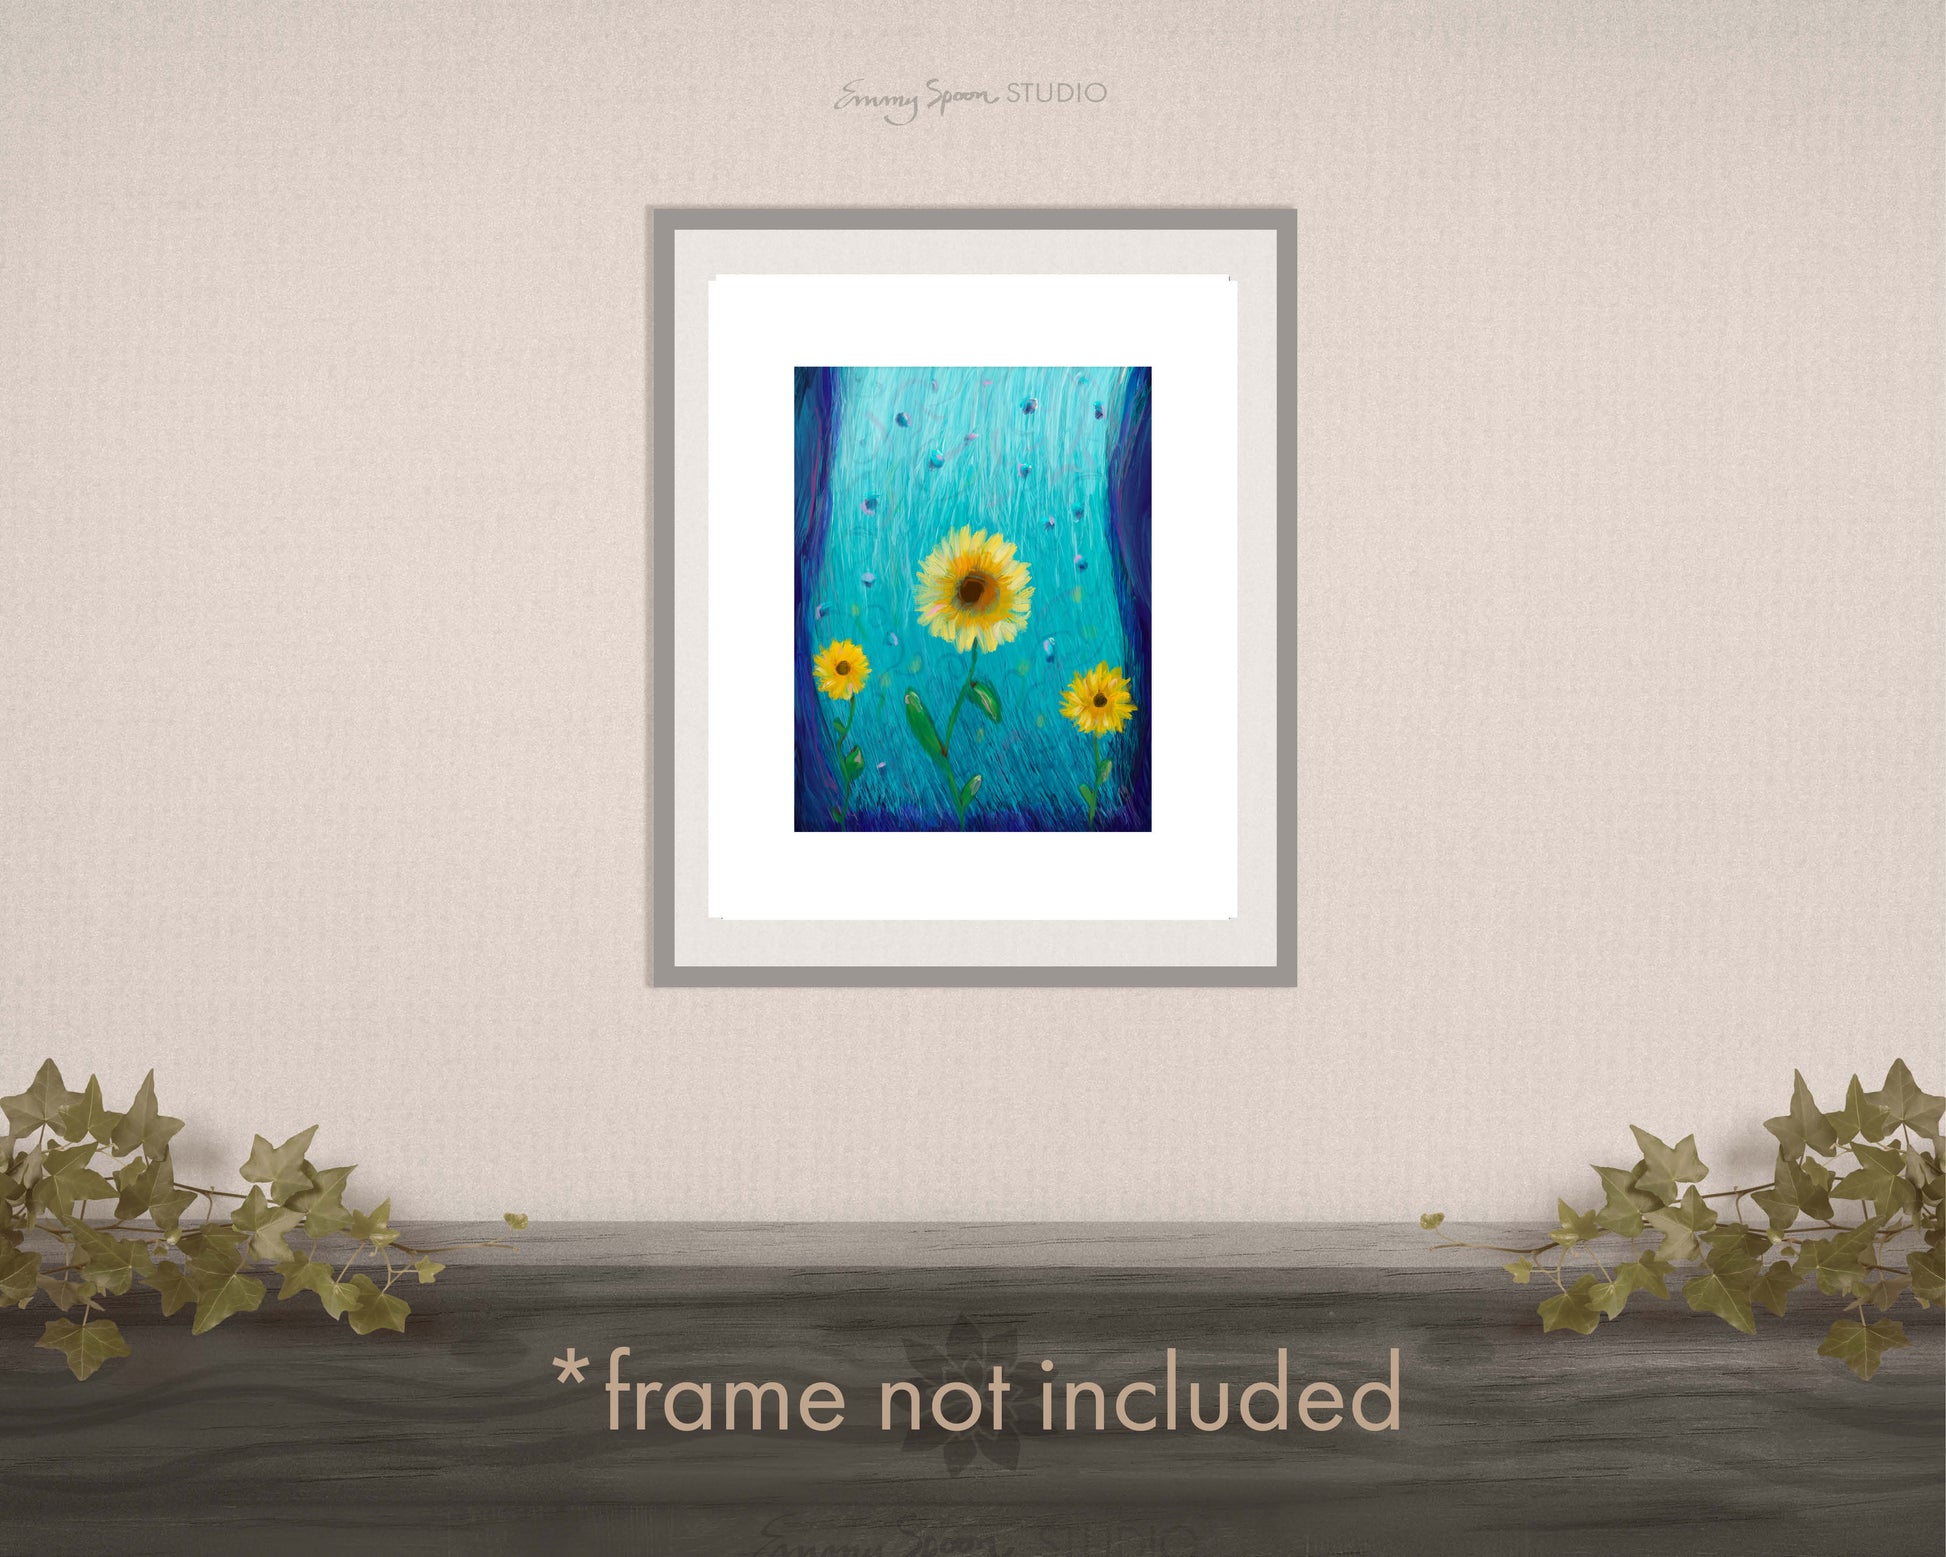 In Bloom (2022) Lustre Art Print by Emmy Spoon Studio. Frame not included.